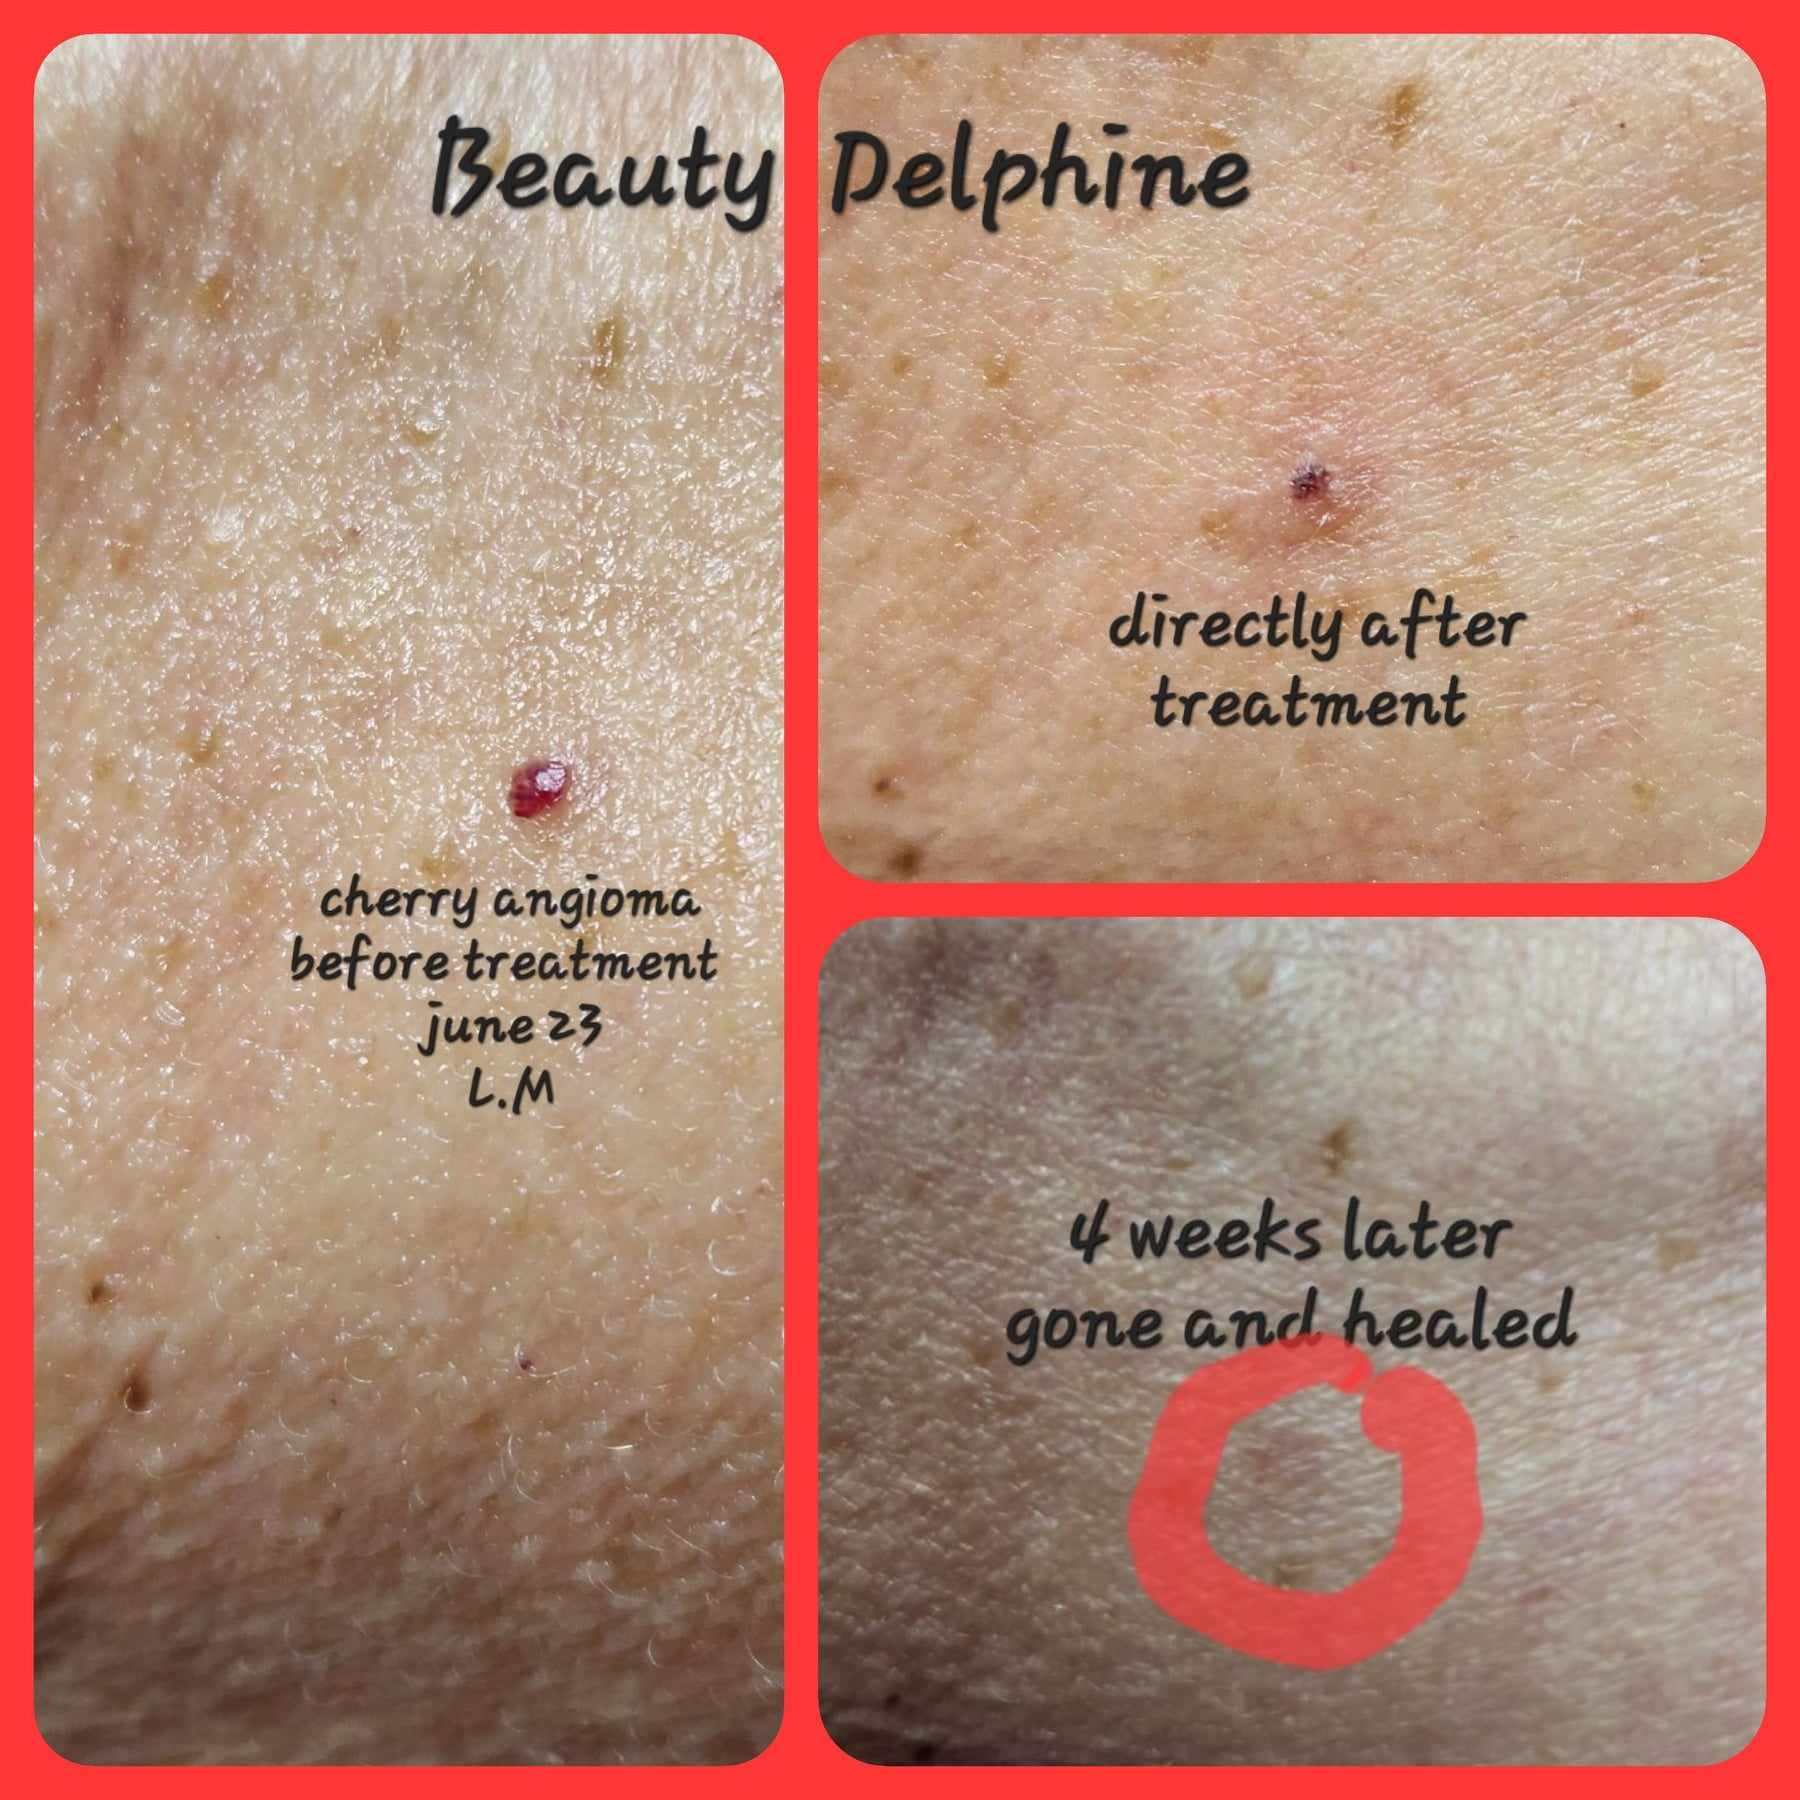 Beauty Therapy, guinot, Beauty Delphine Melbourne, Elthams Skin C